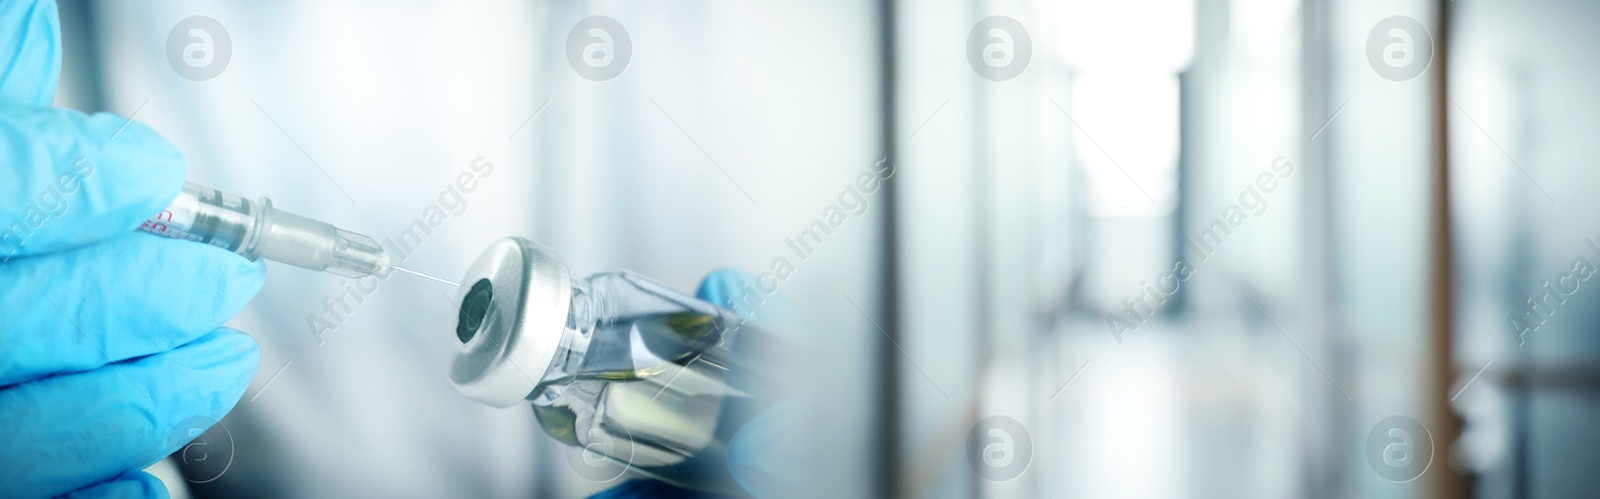 Image of Doctor filling syringe with medication from glass vial on blurred background, closeup. Banner design